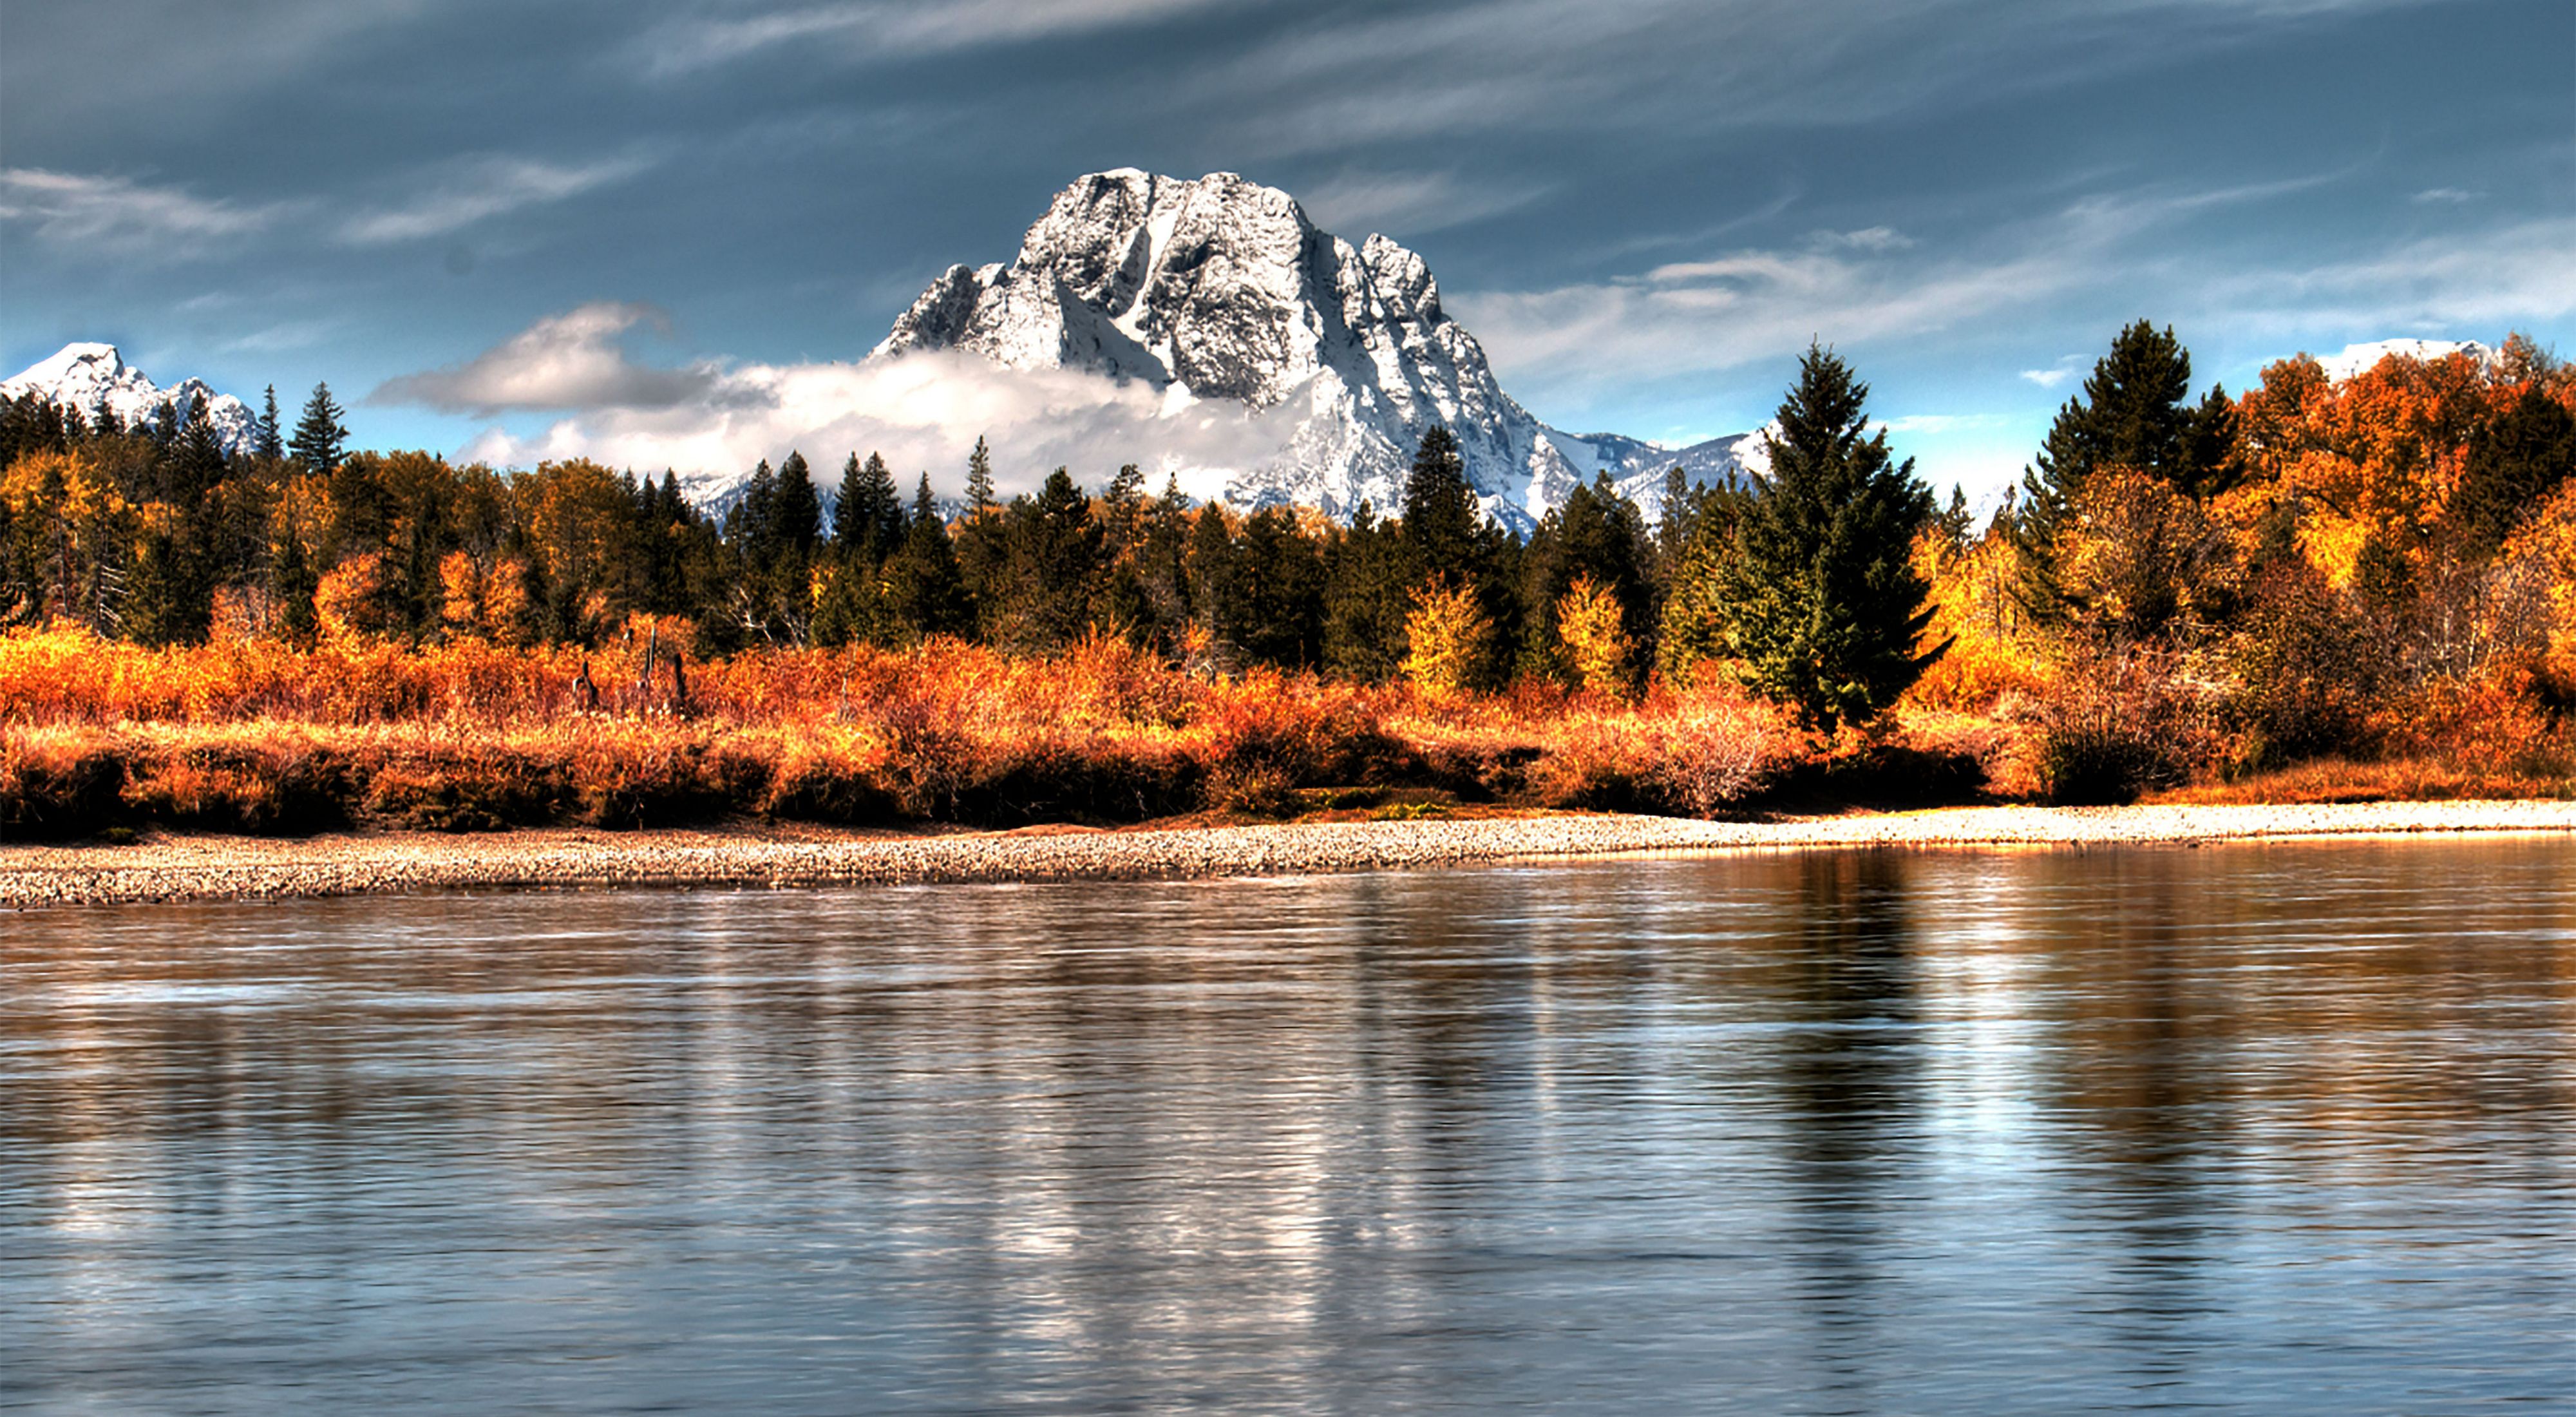 Bright orange fall foliage on the shores of Jackson Lake, with a large, rocky, snow-covered mountain peak in the background.